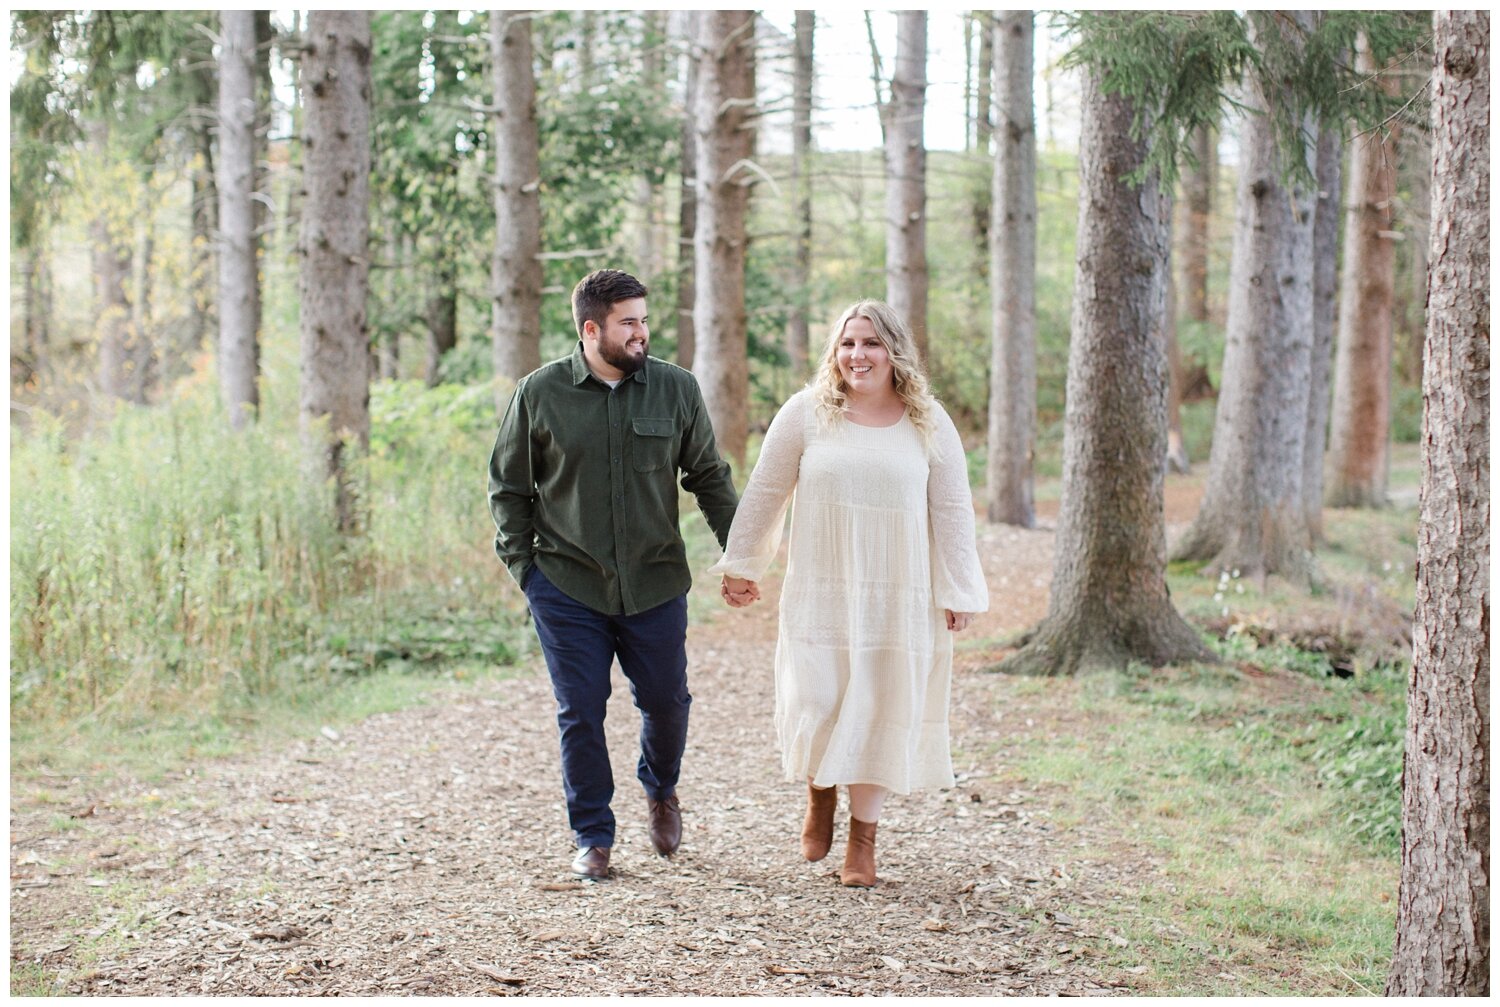 Clarks Summit PA Fall Engagement Session_0010.jpg